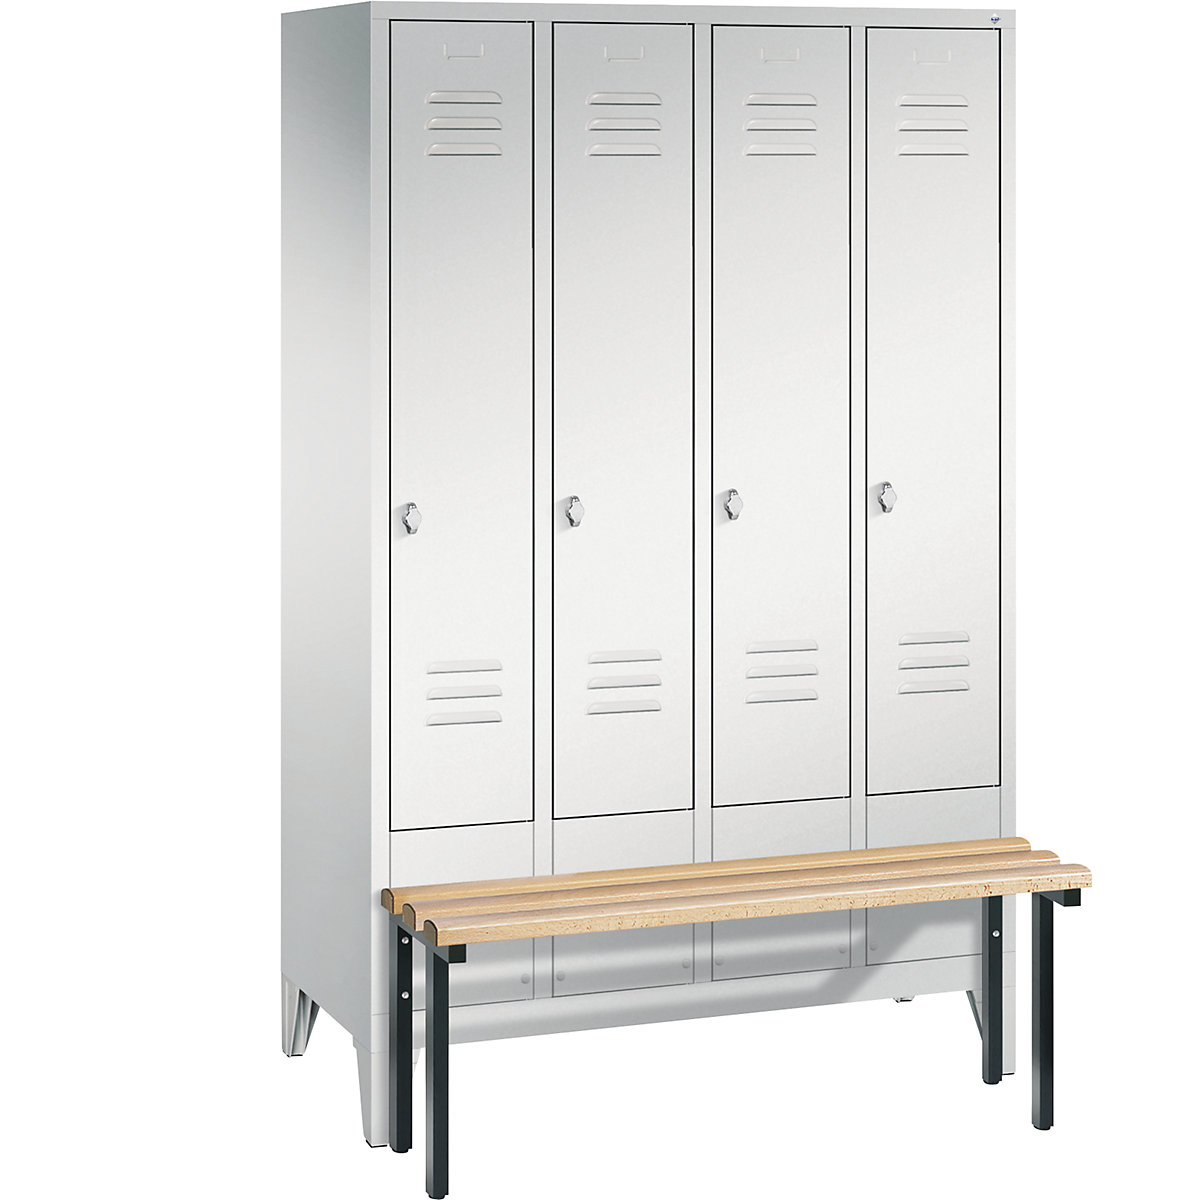 CLASSIC cloakroom locker with bench mounted in front – C+P, 4 compartments, compartment width 300 mm, light grey-13